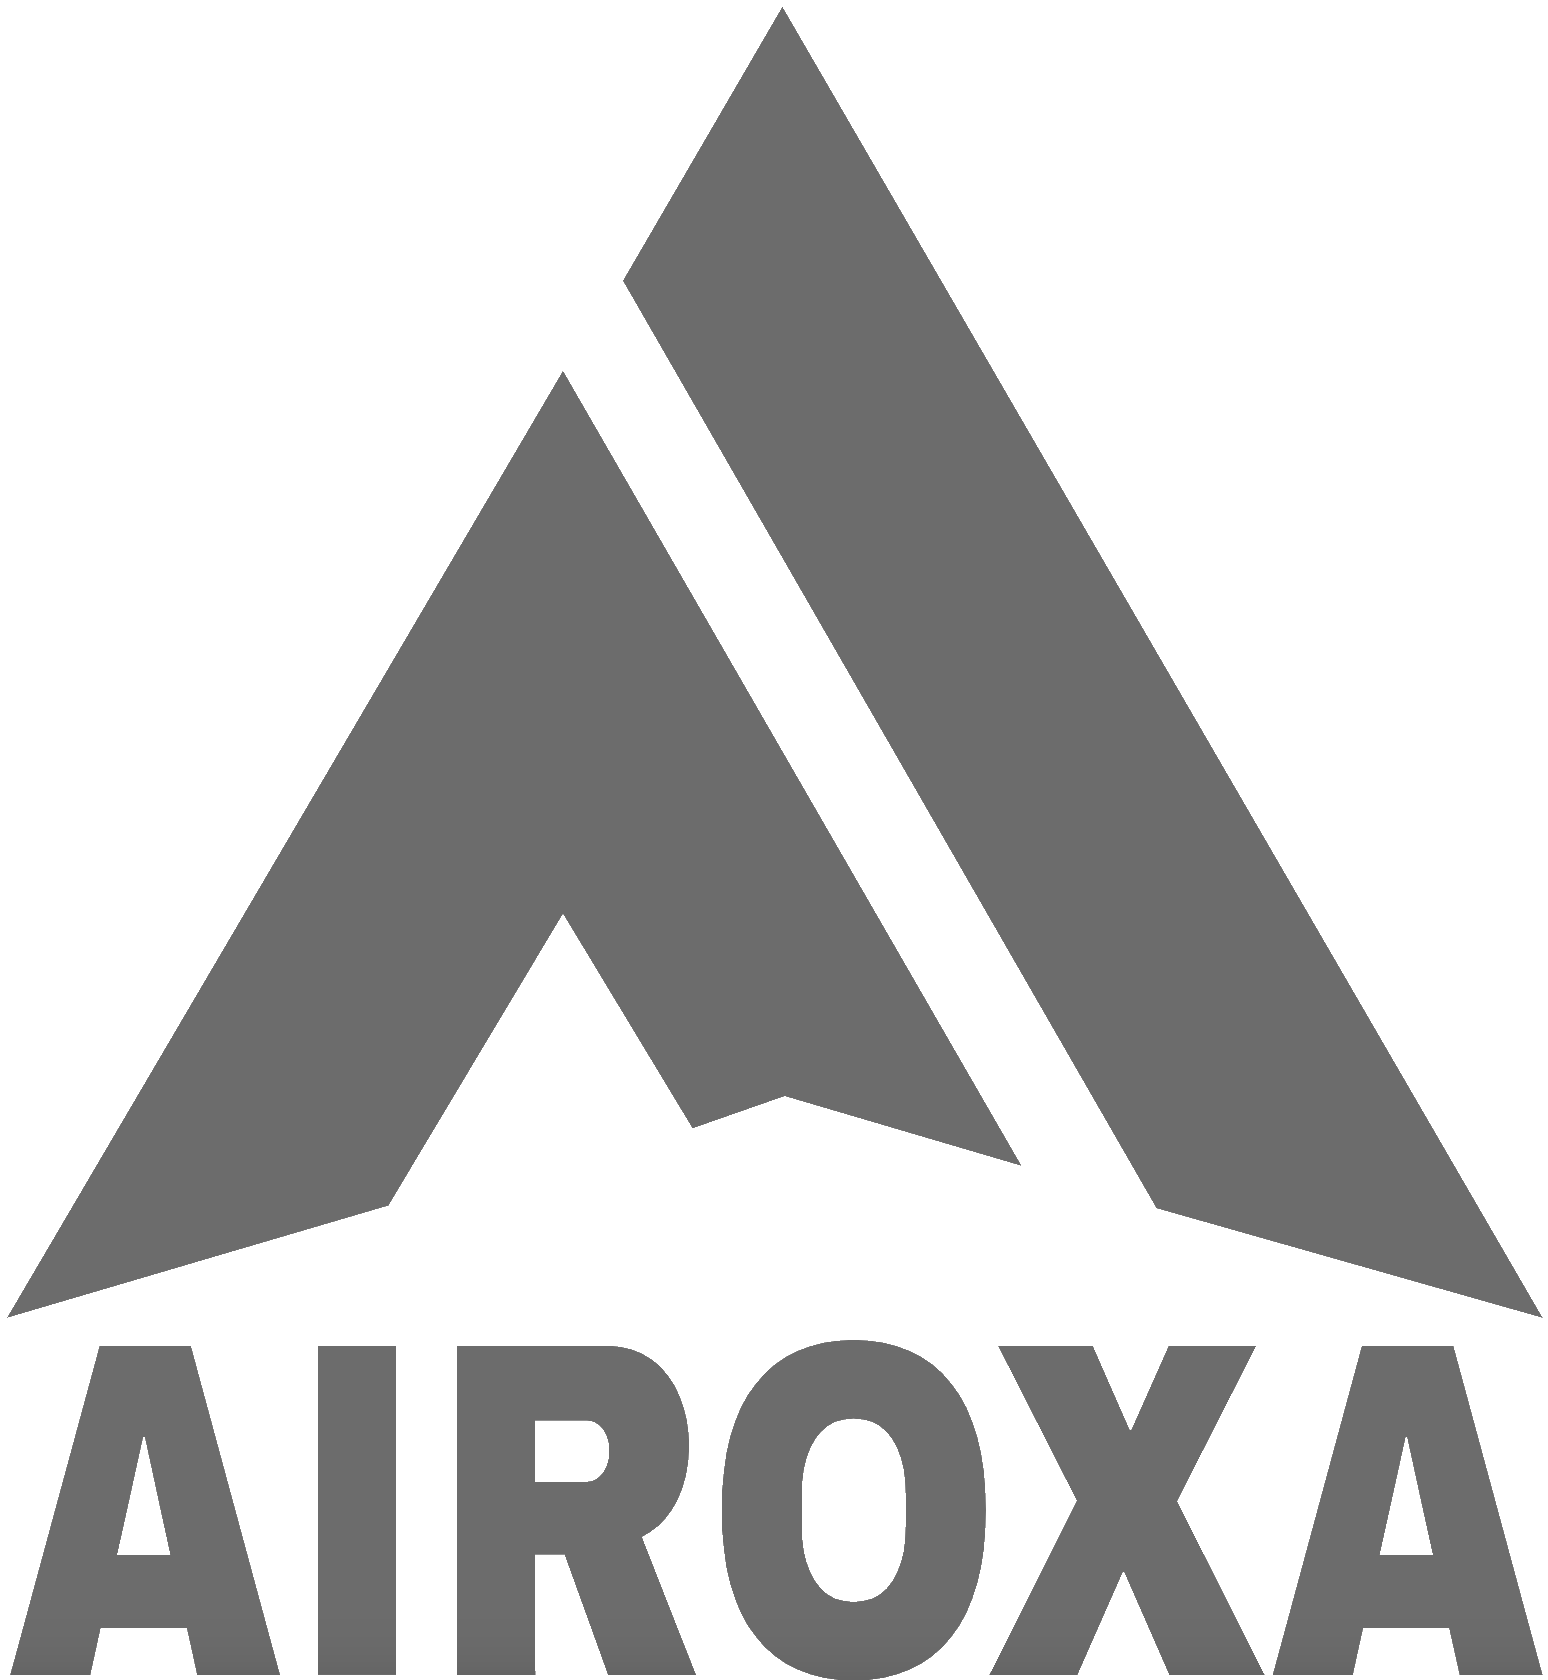 Recognized by Airoxa